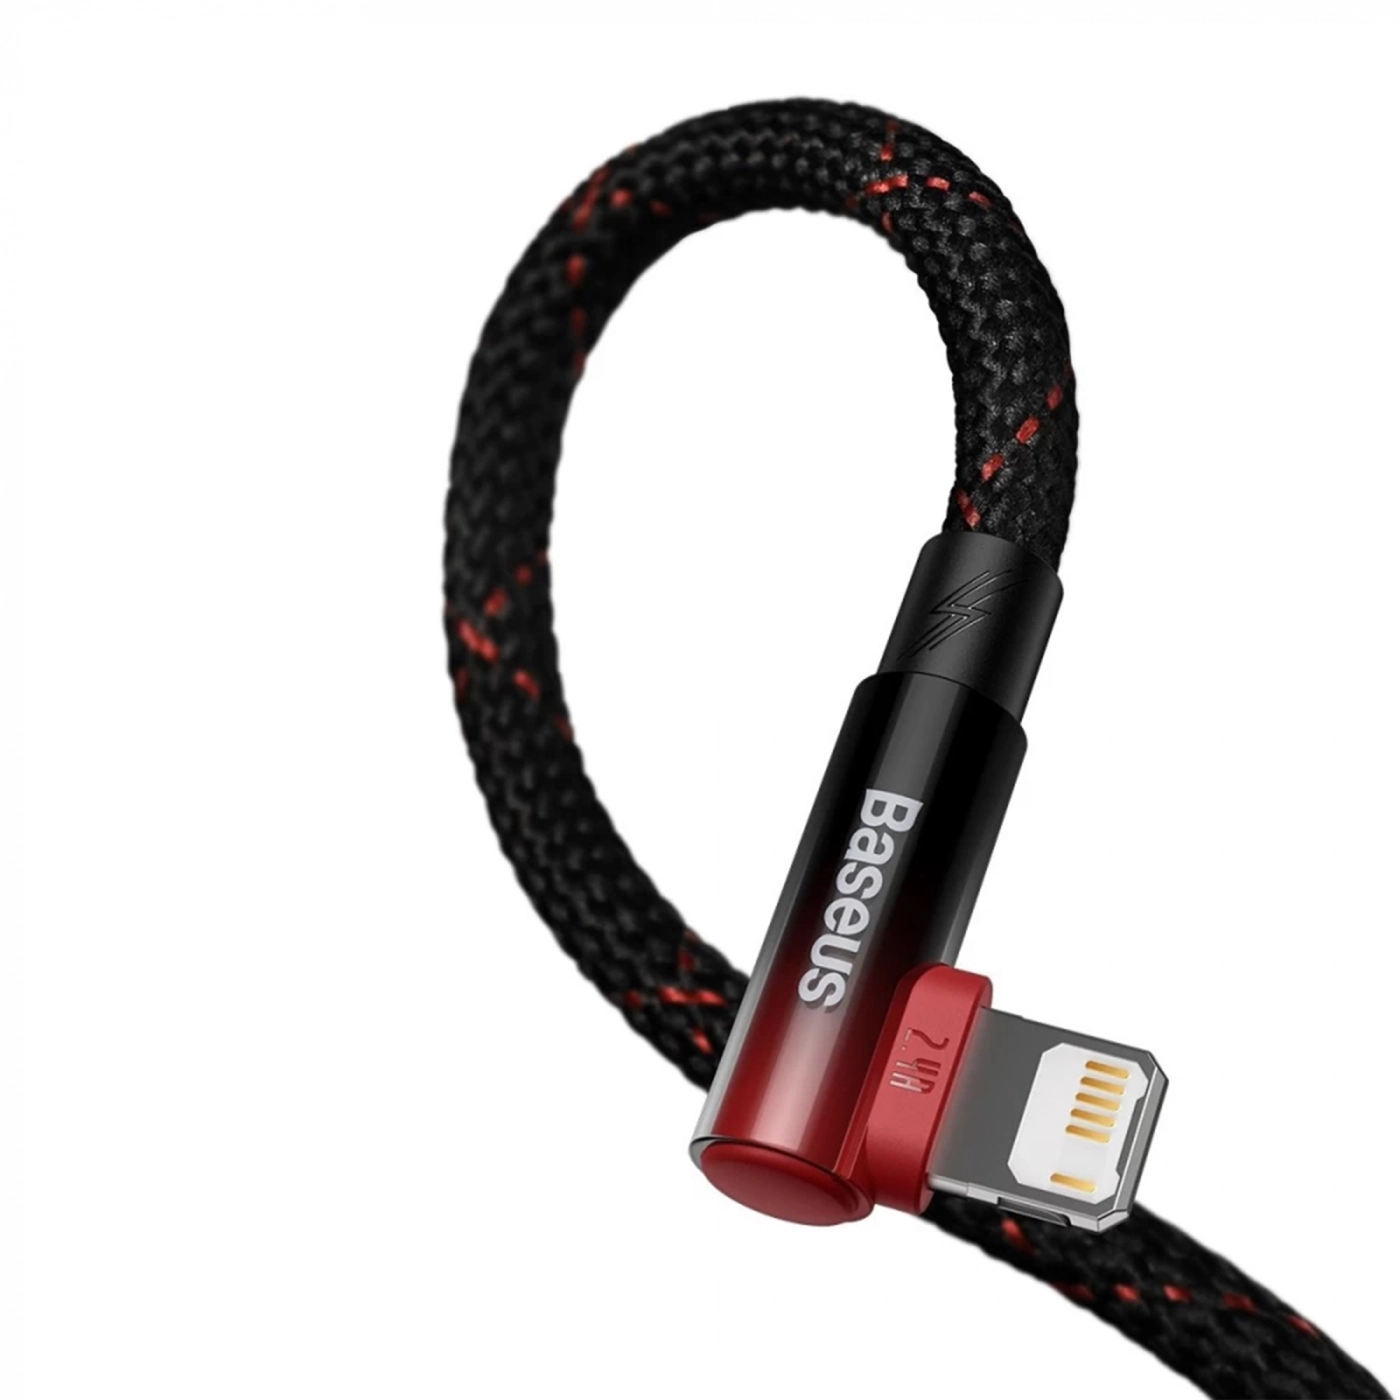 Купити Кабель Baseus MVP 2 Elbow-shaped Fast Charging Data Cable USB to iP 2.4A 2m Black|Red - фото 3